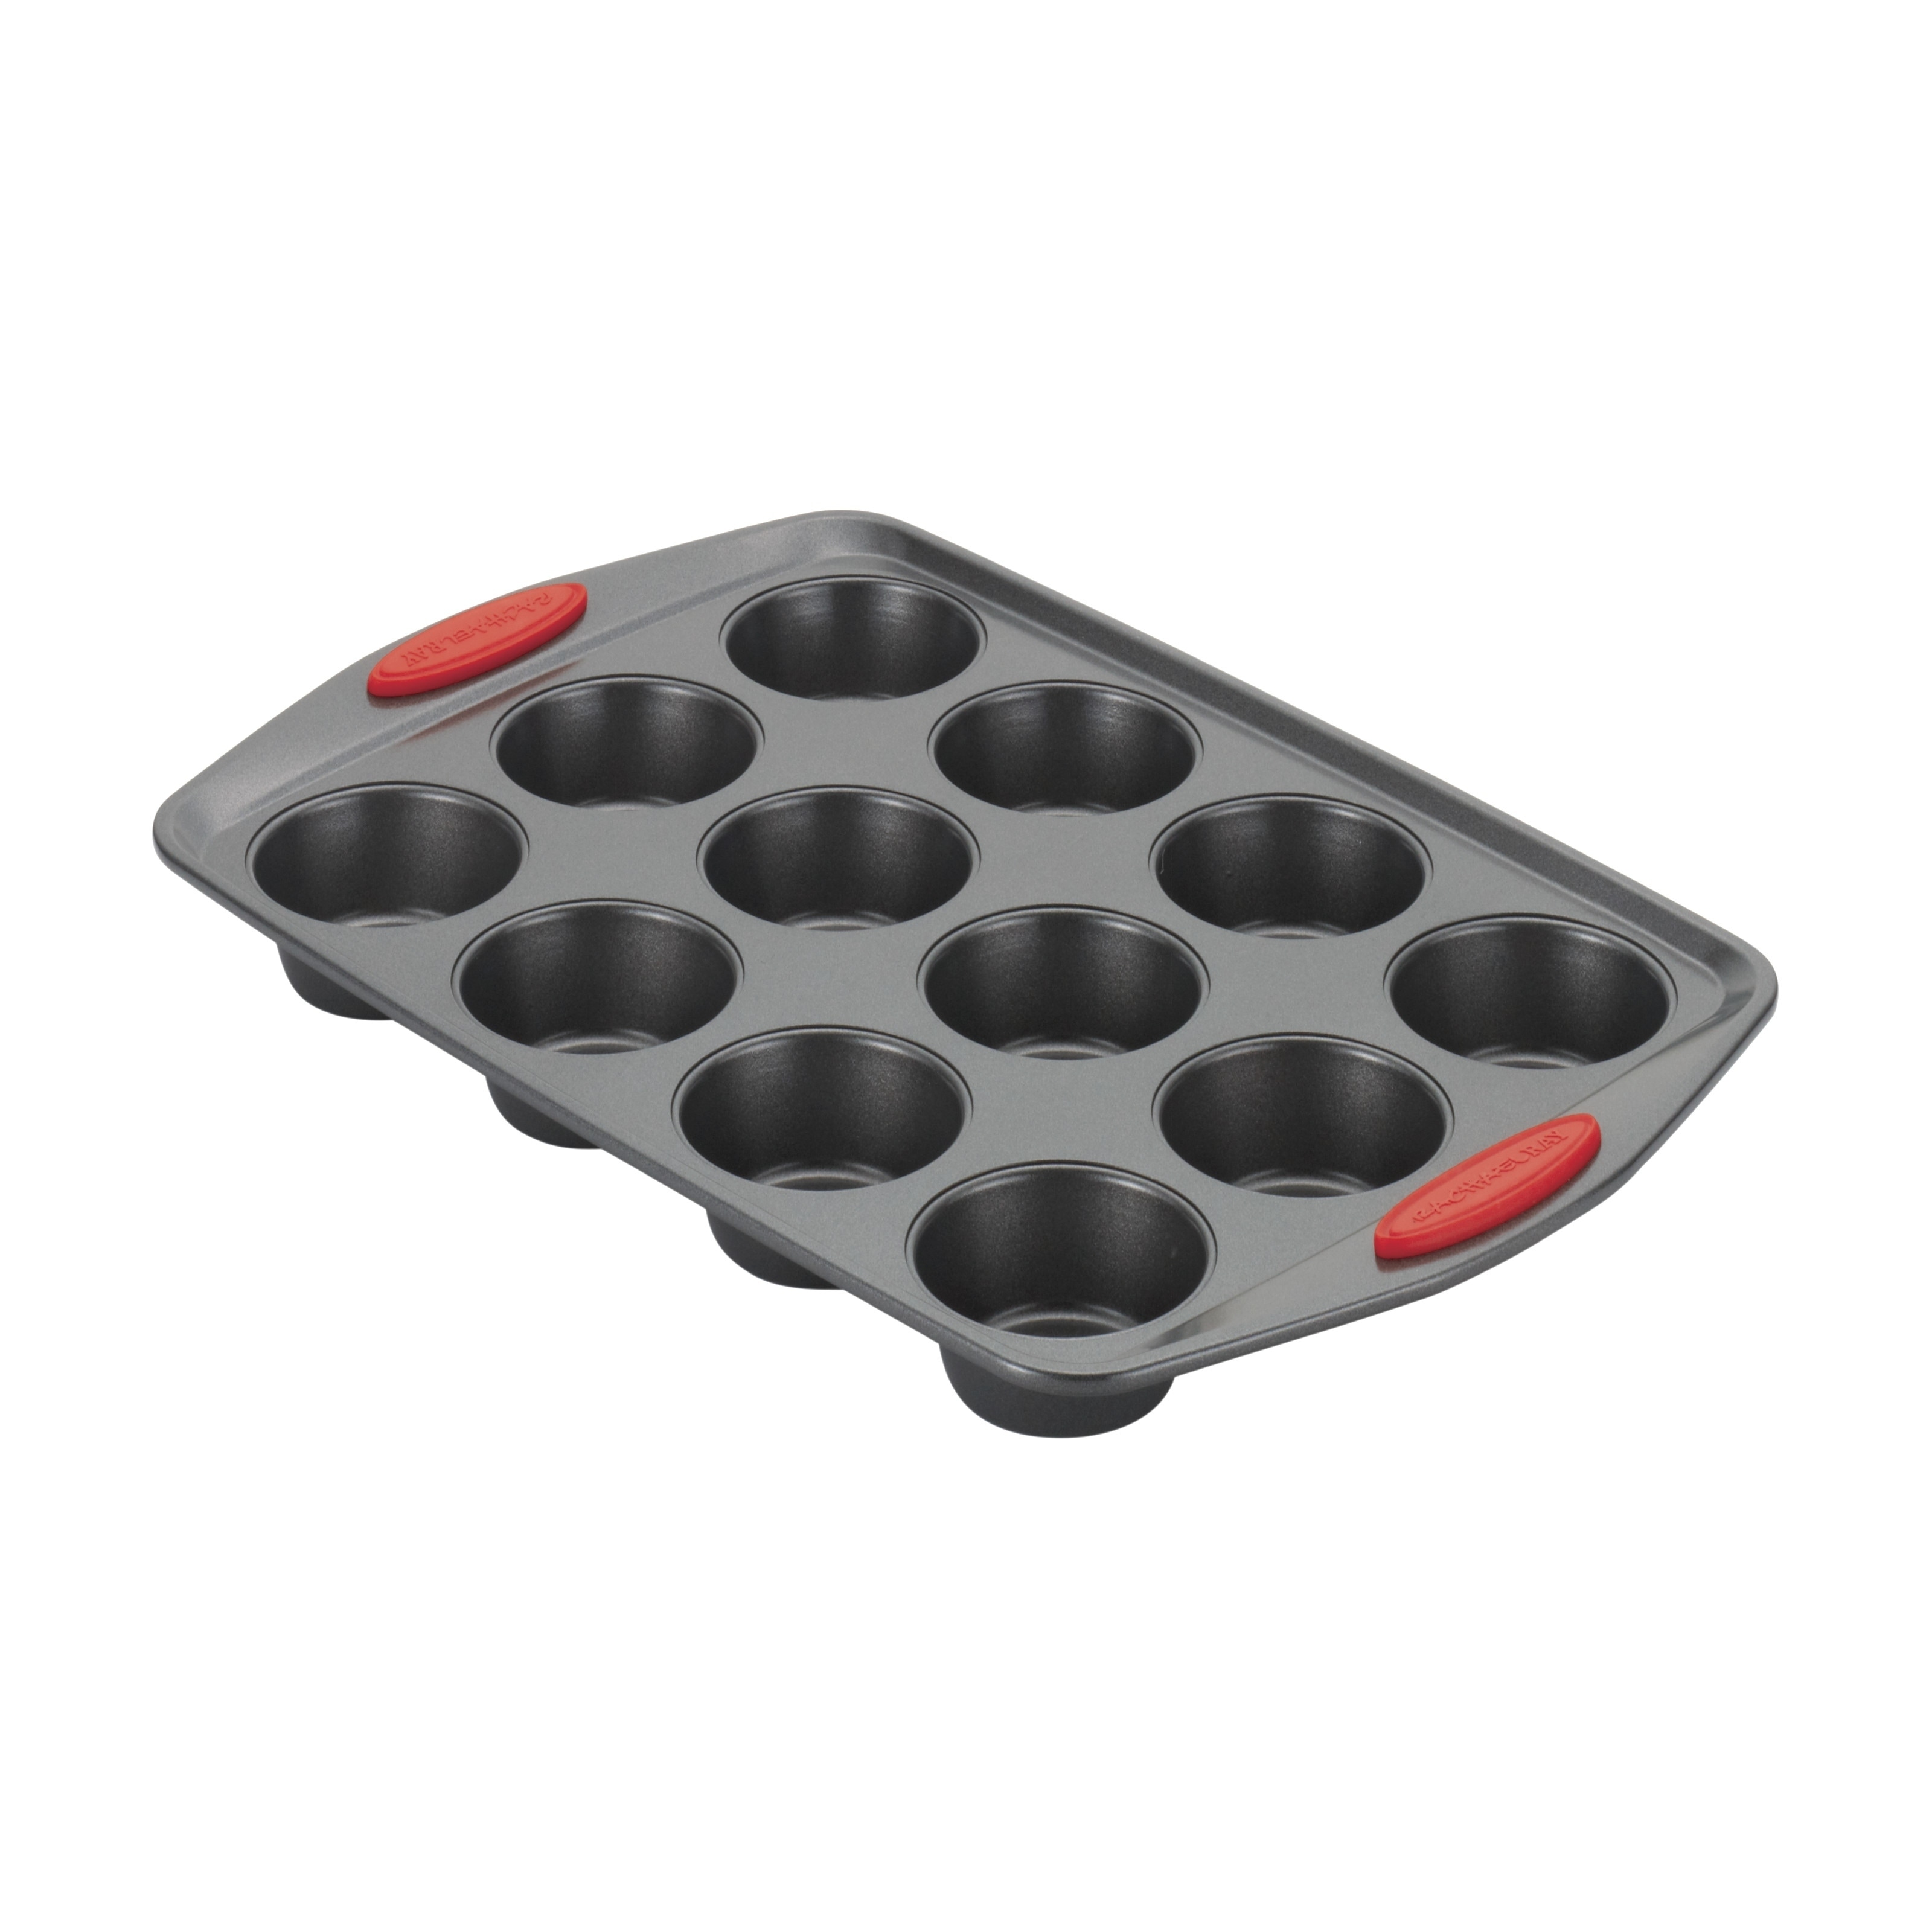 https://ak1.ostkcdn.com/images/products/29067694/Rachael-Ray-Yum-o-Nonstick-Bakeware-12-Cup-Muffin-and-Cupcake-Pan-c7df8555-fd4b-4dd0-a5c1-3d240a9f5683.jpg